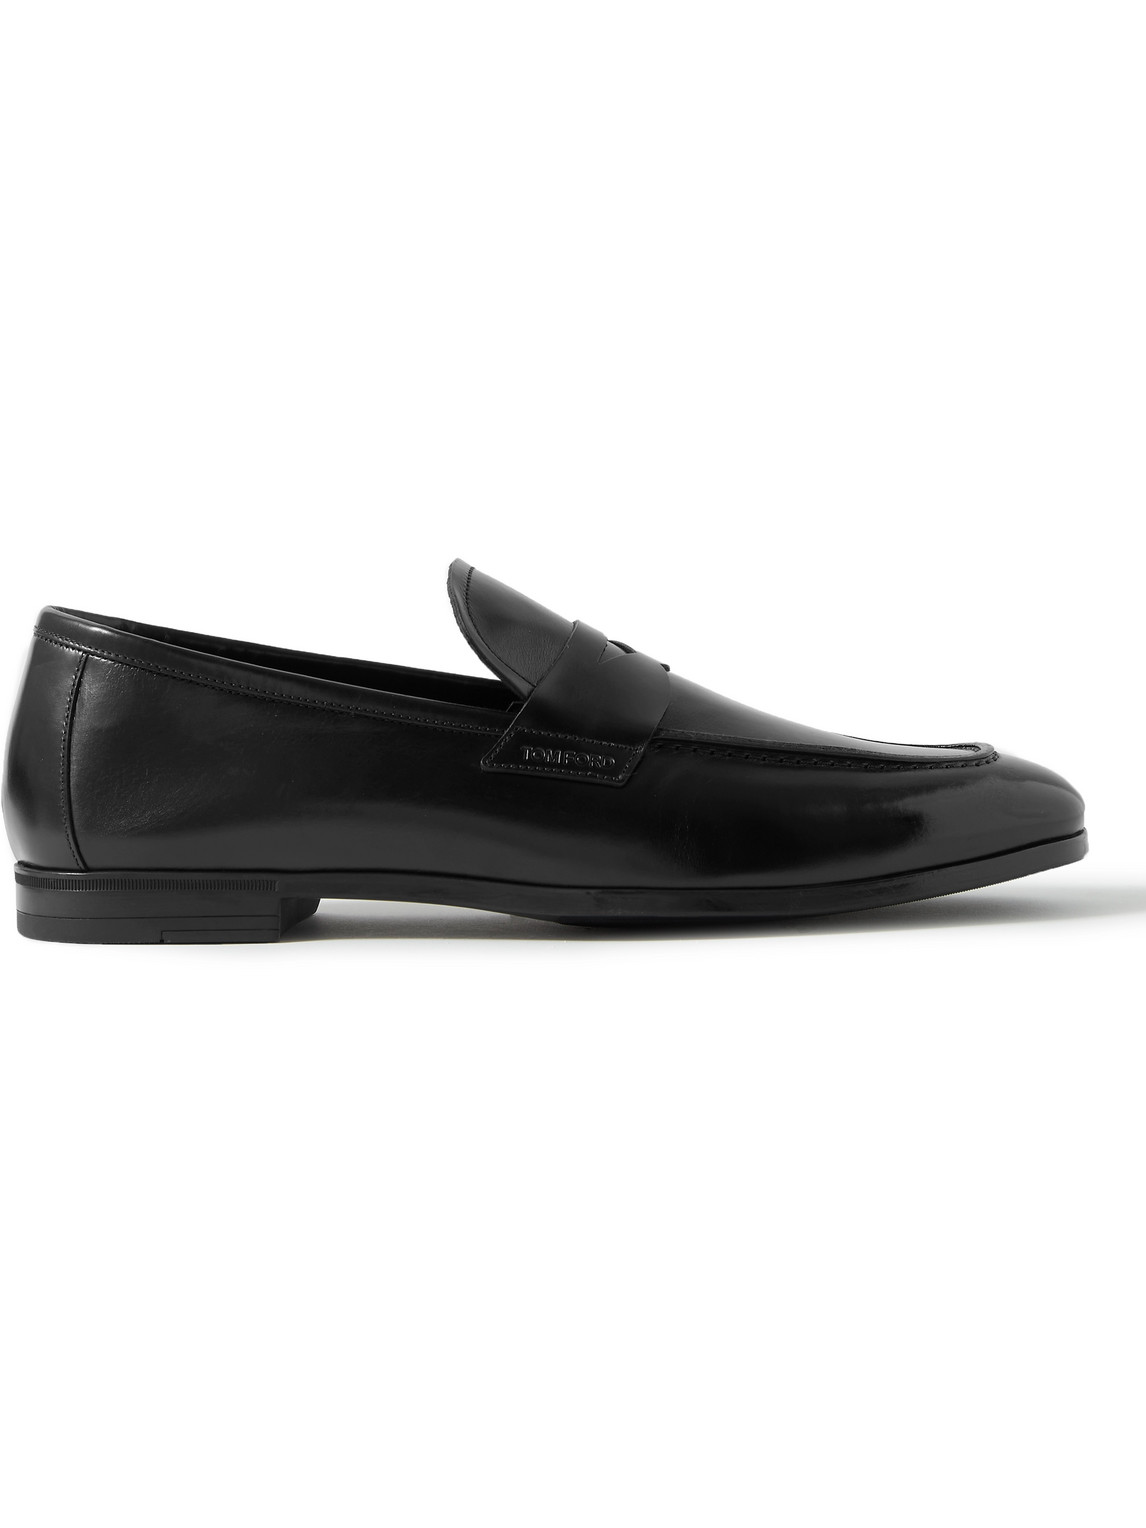 TOM FORD SEAN LEATHER PENNY LOAFERS